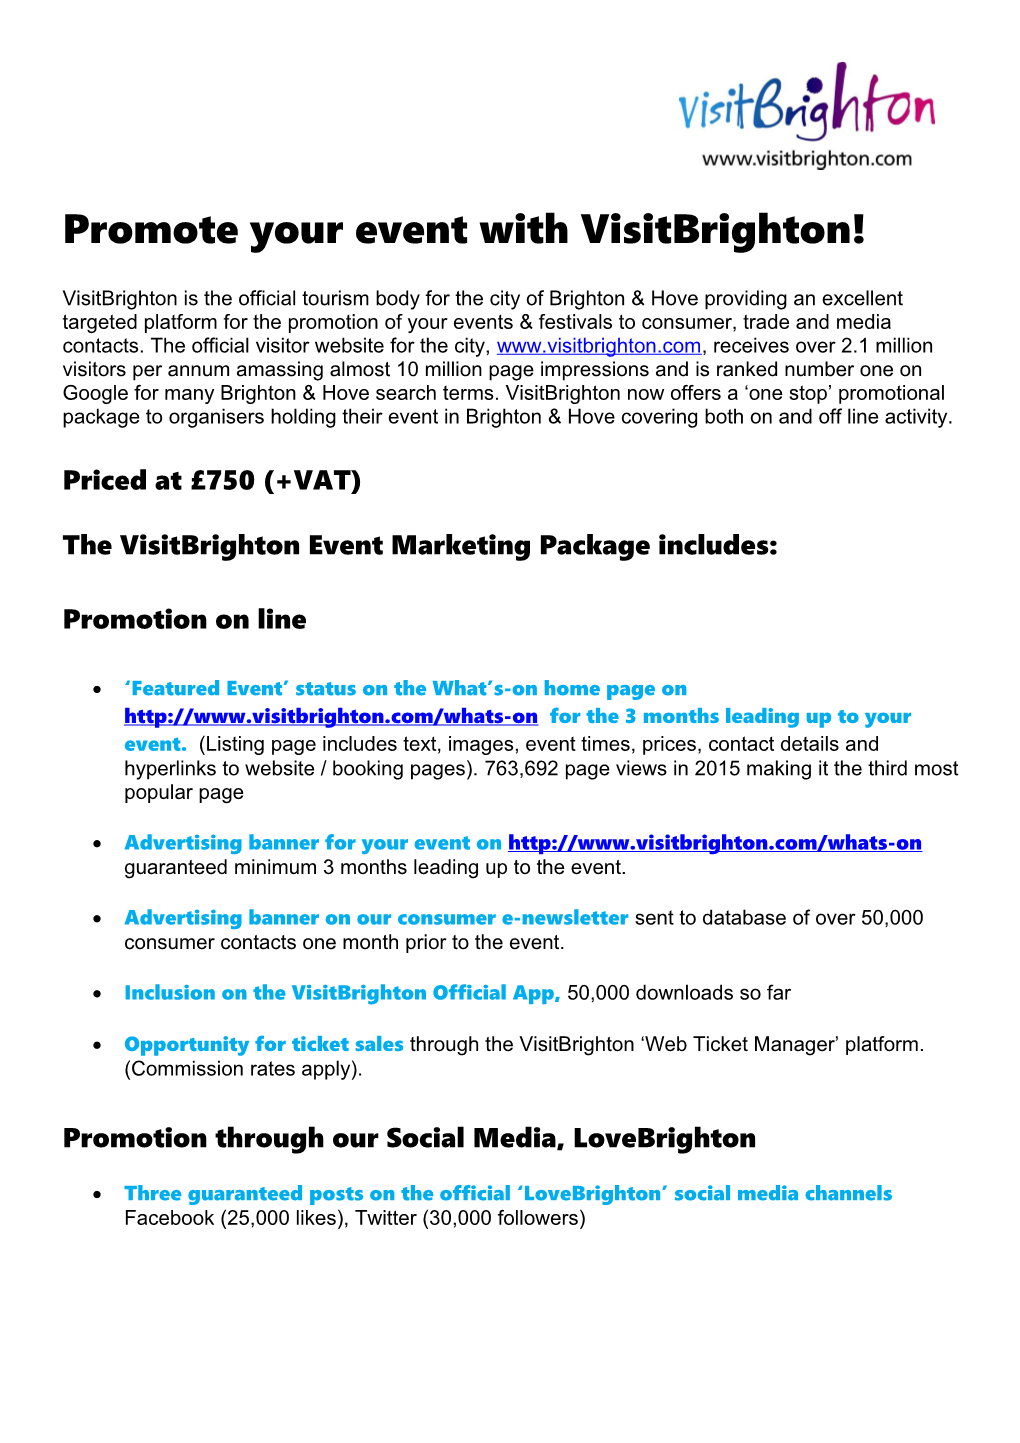 Promote Your Event with Visitbrighton!